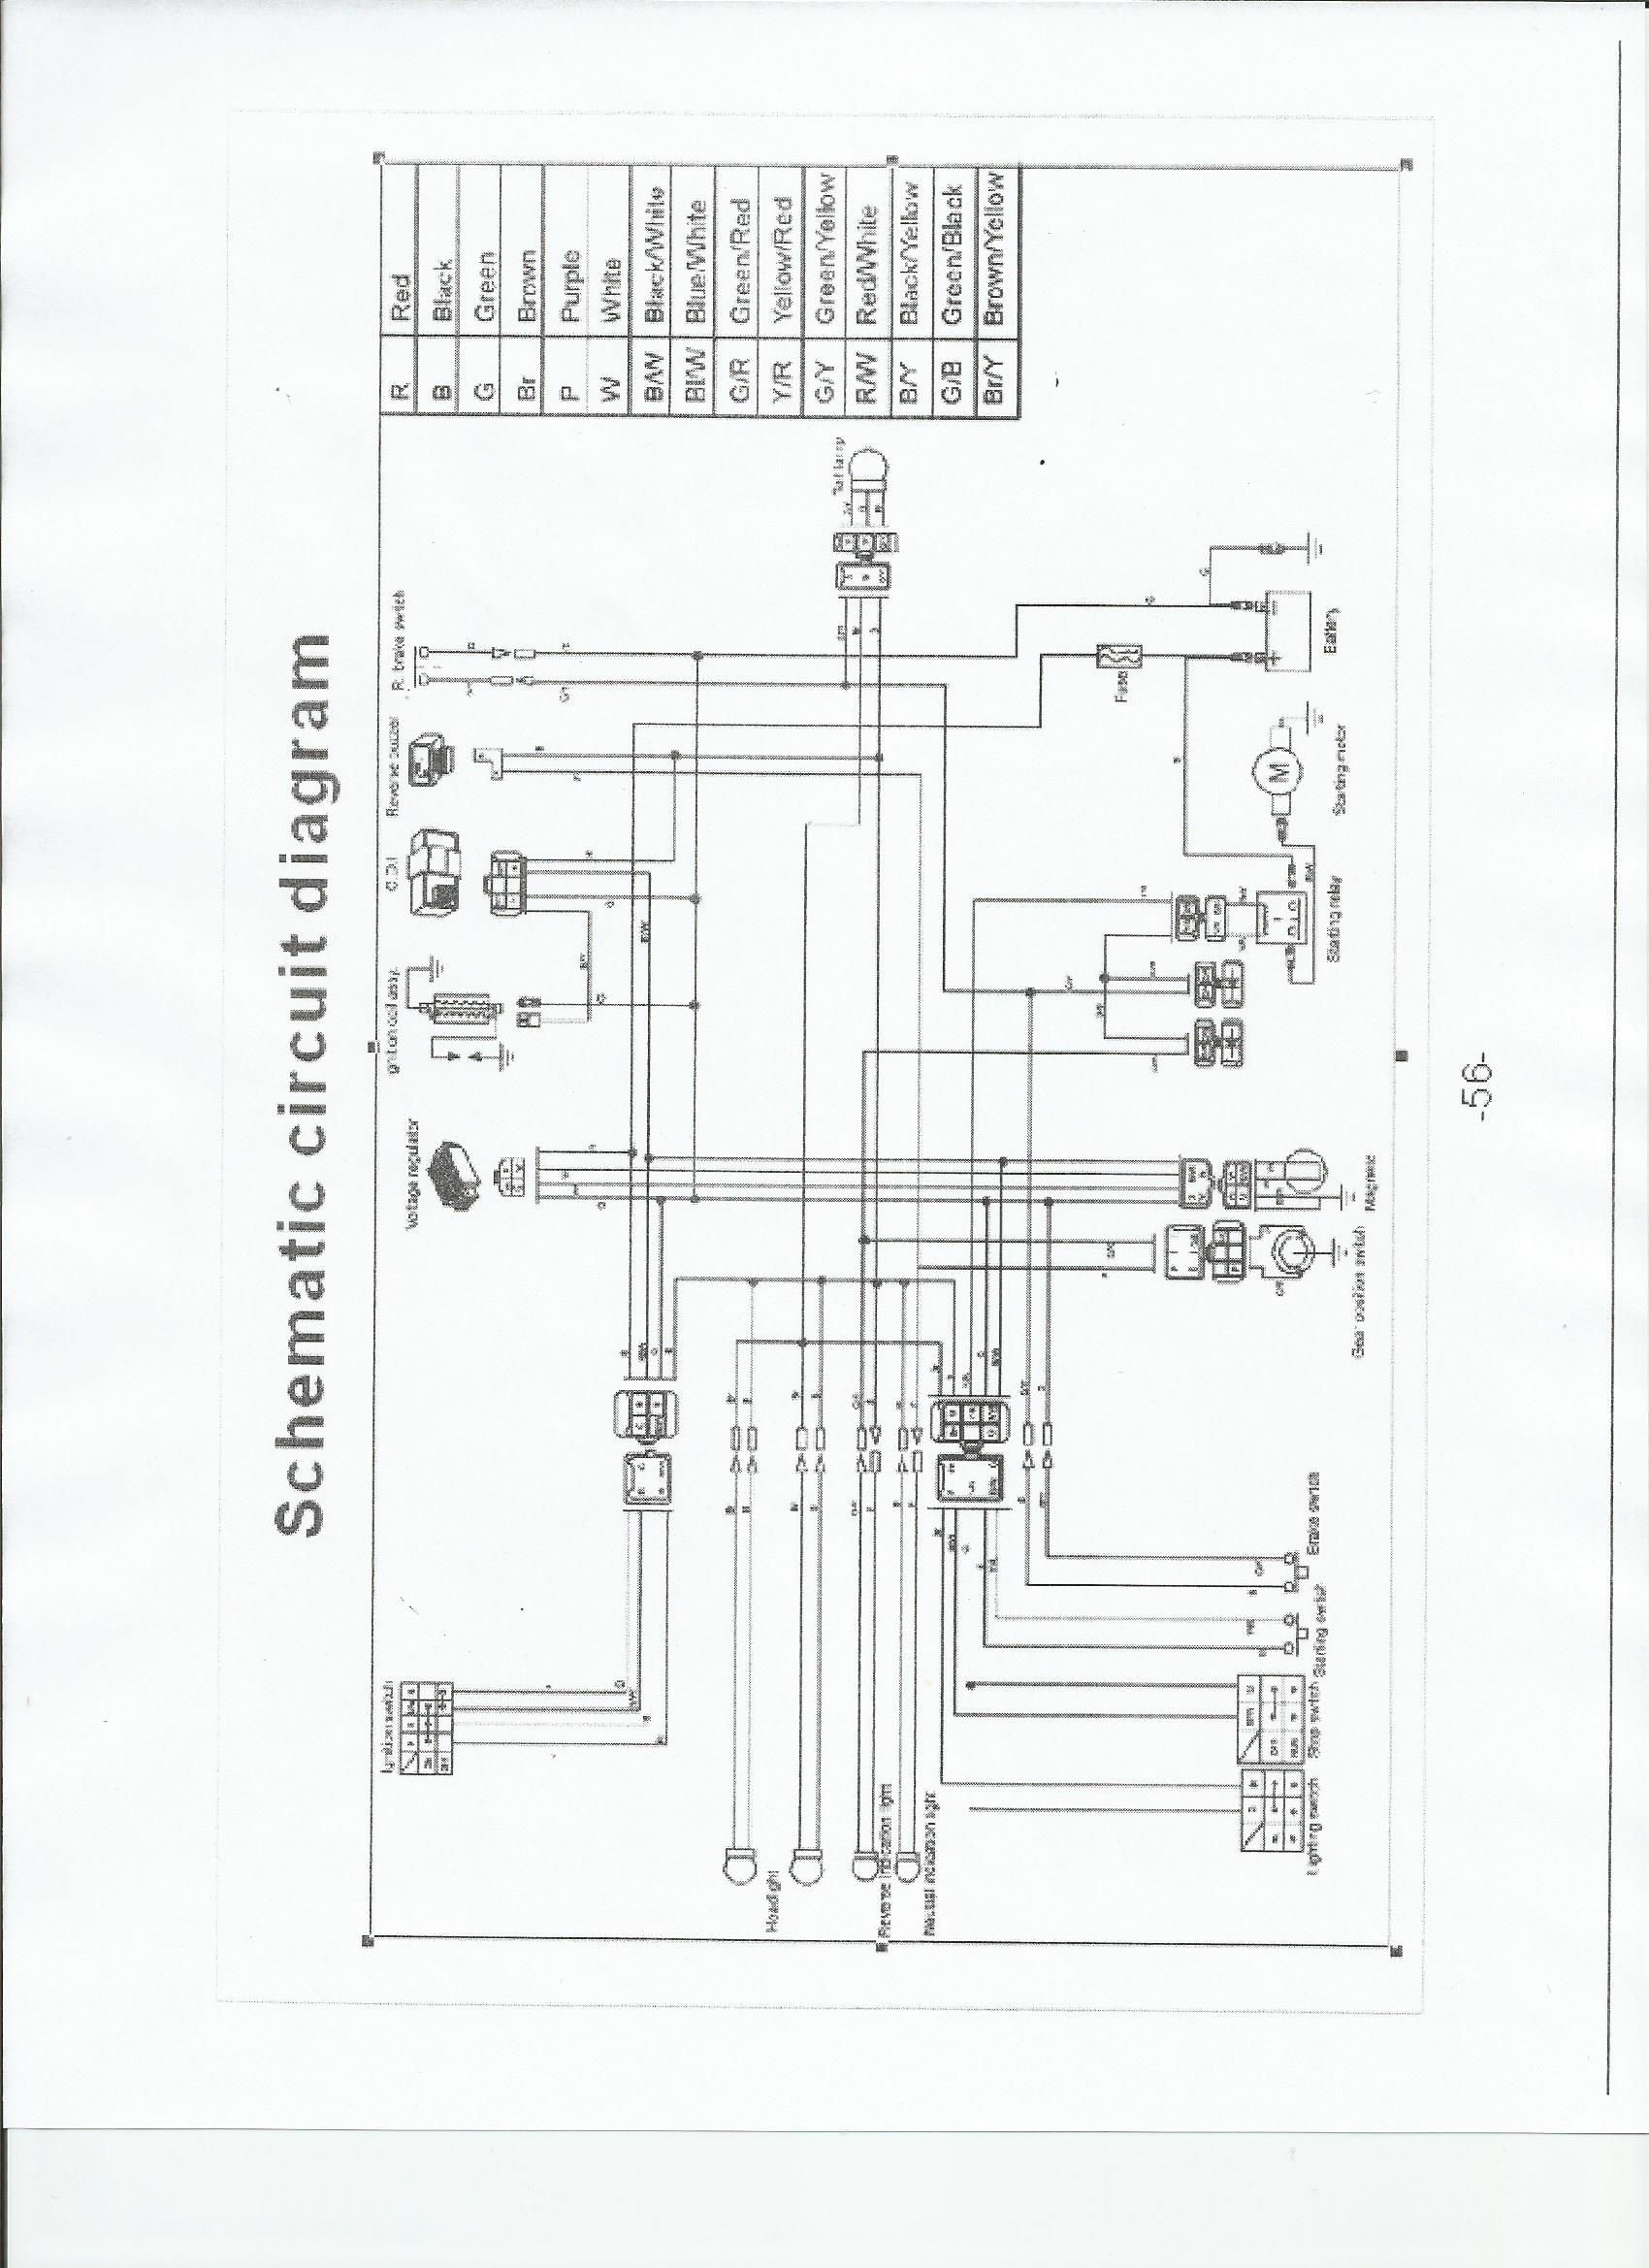 Wiring Diagram for A Chinese 110 atv Ee 8176] Wiring Diagram Hensim atv Wiring Diagram Tao Of Wiring Diagram for A Chinese 110 atv